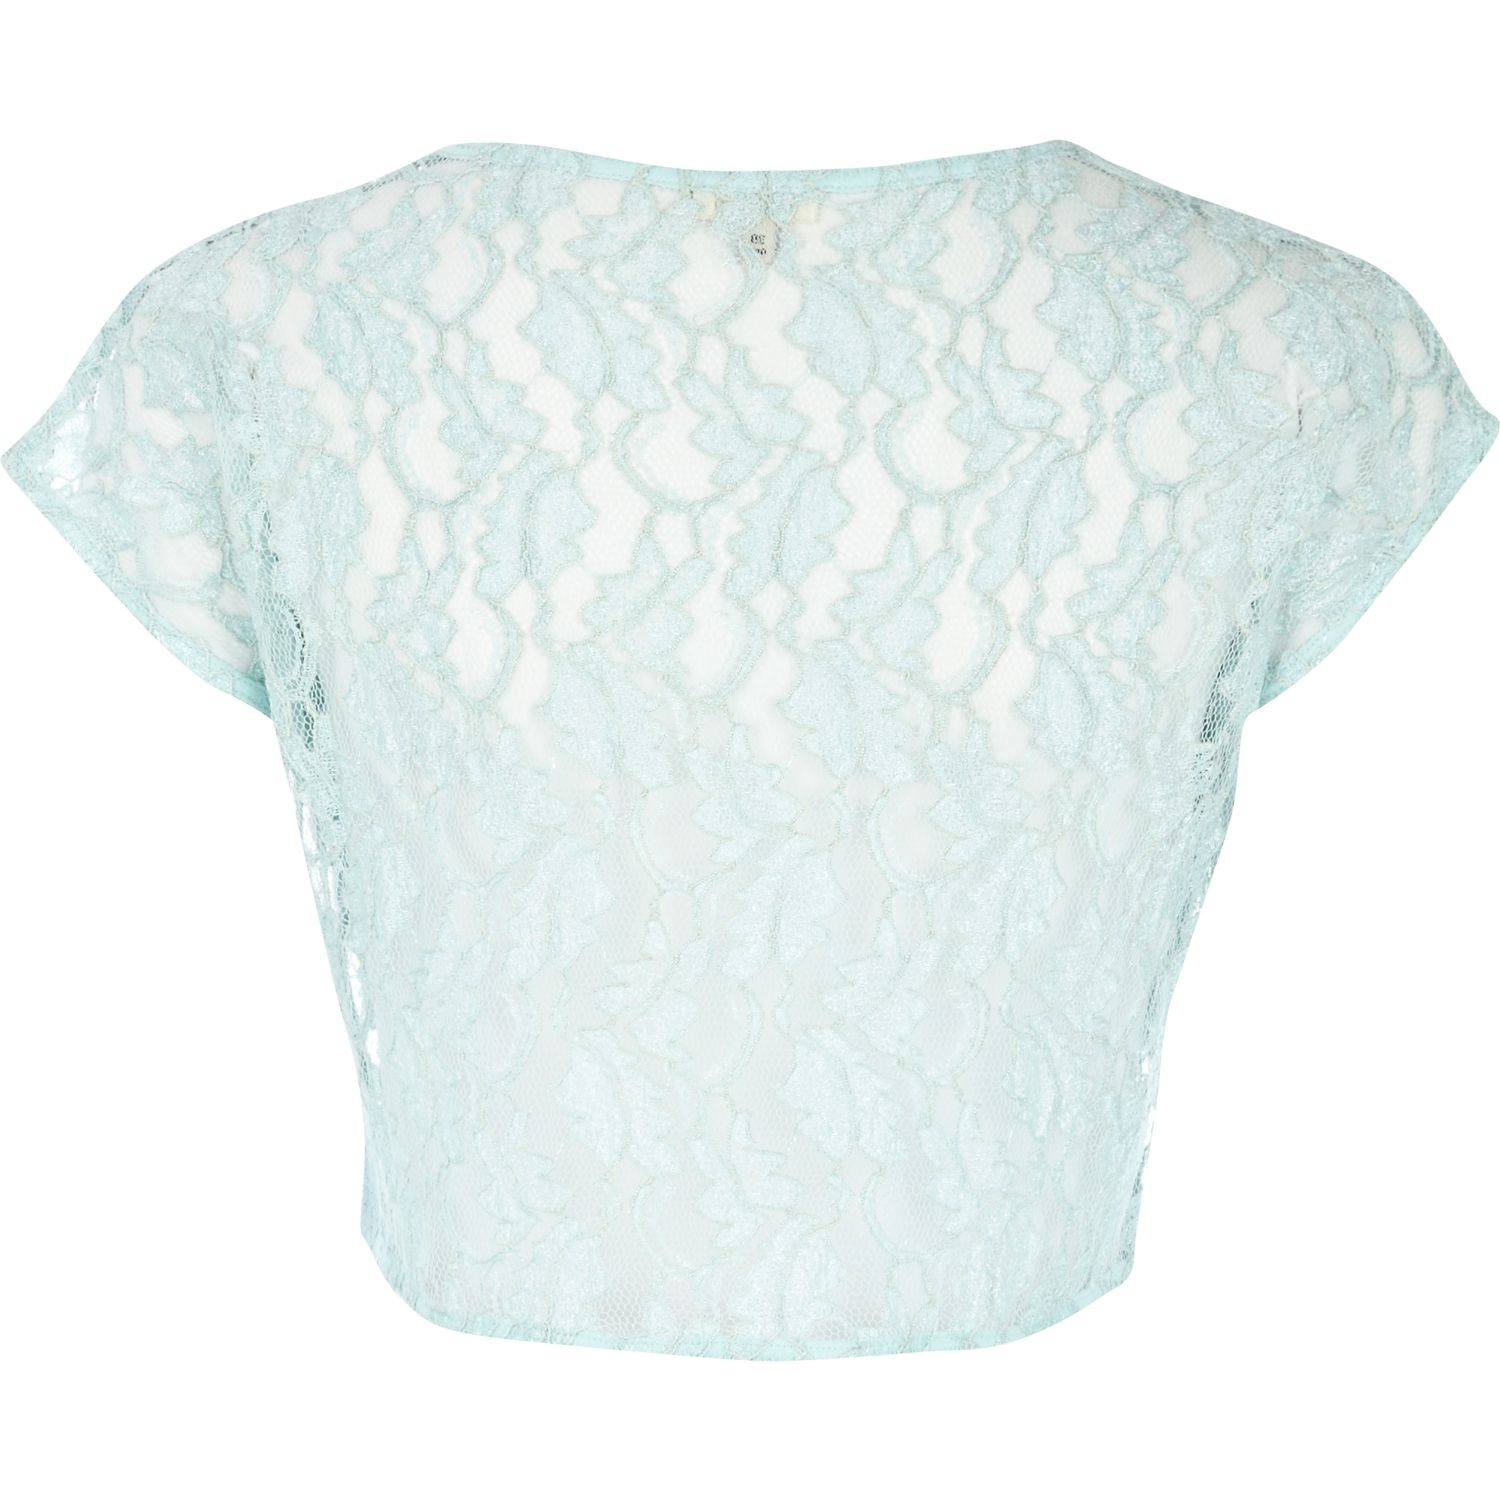 River Island Light Blue Lace Sequin Embellished Crop Top in Blue - Lyst